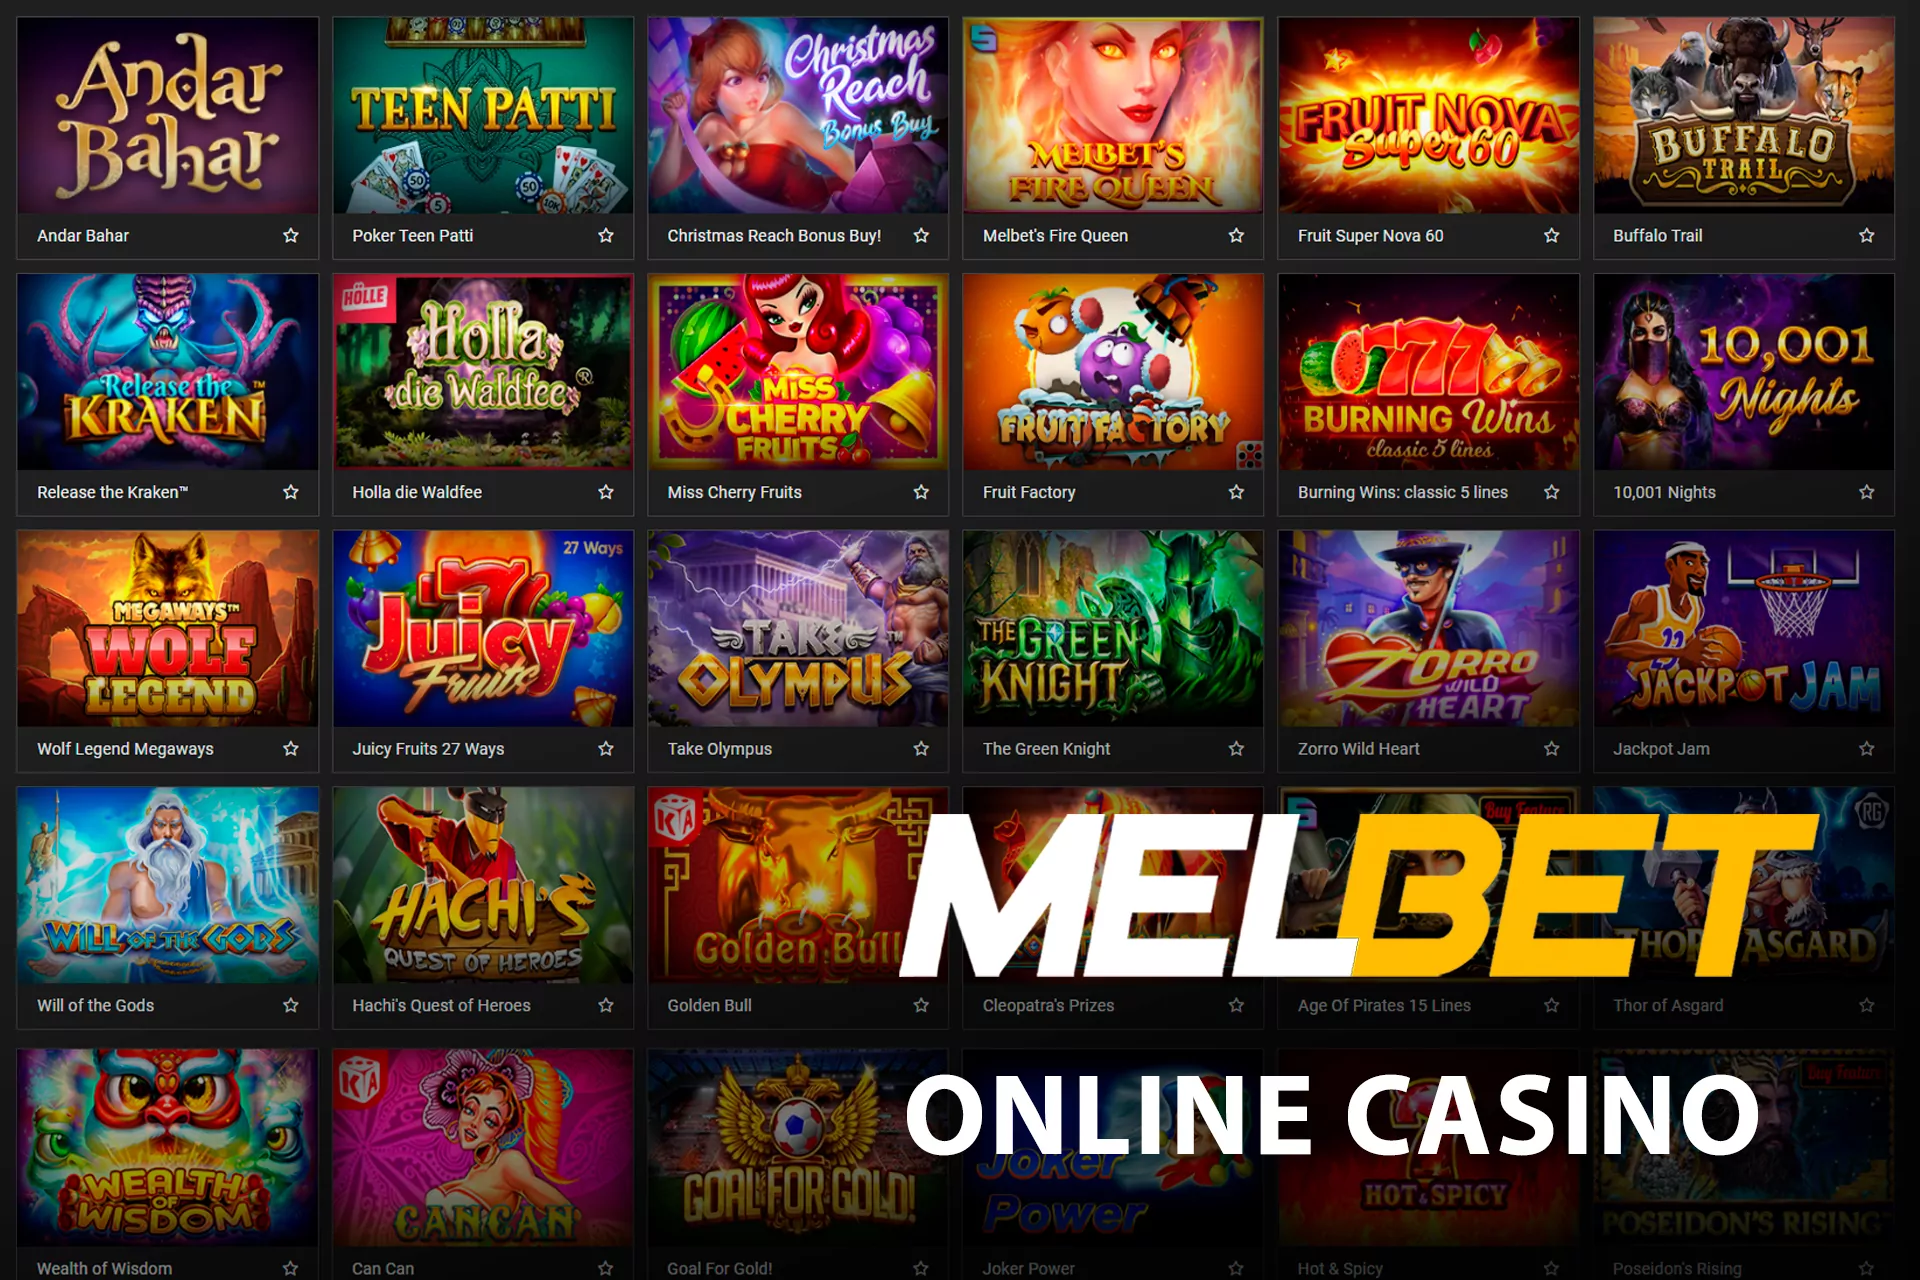 Between matches, you can play Melbet online casino.